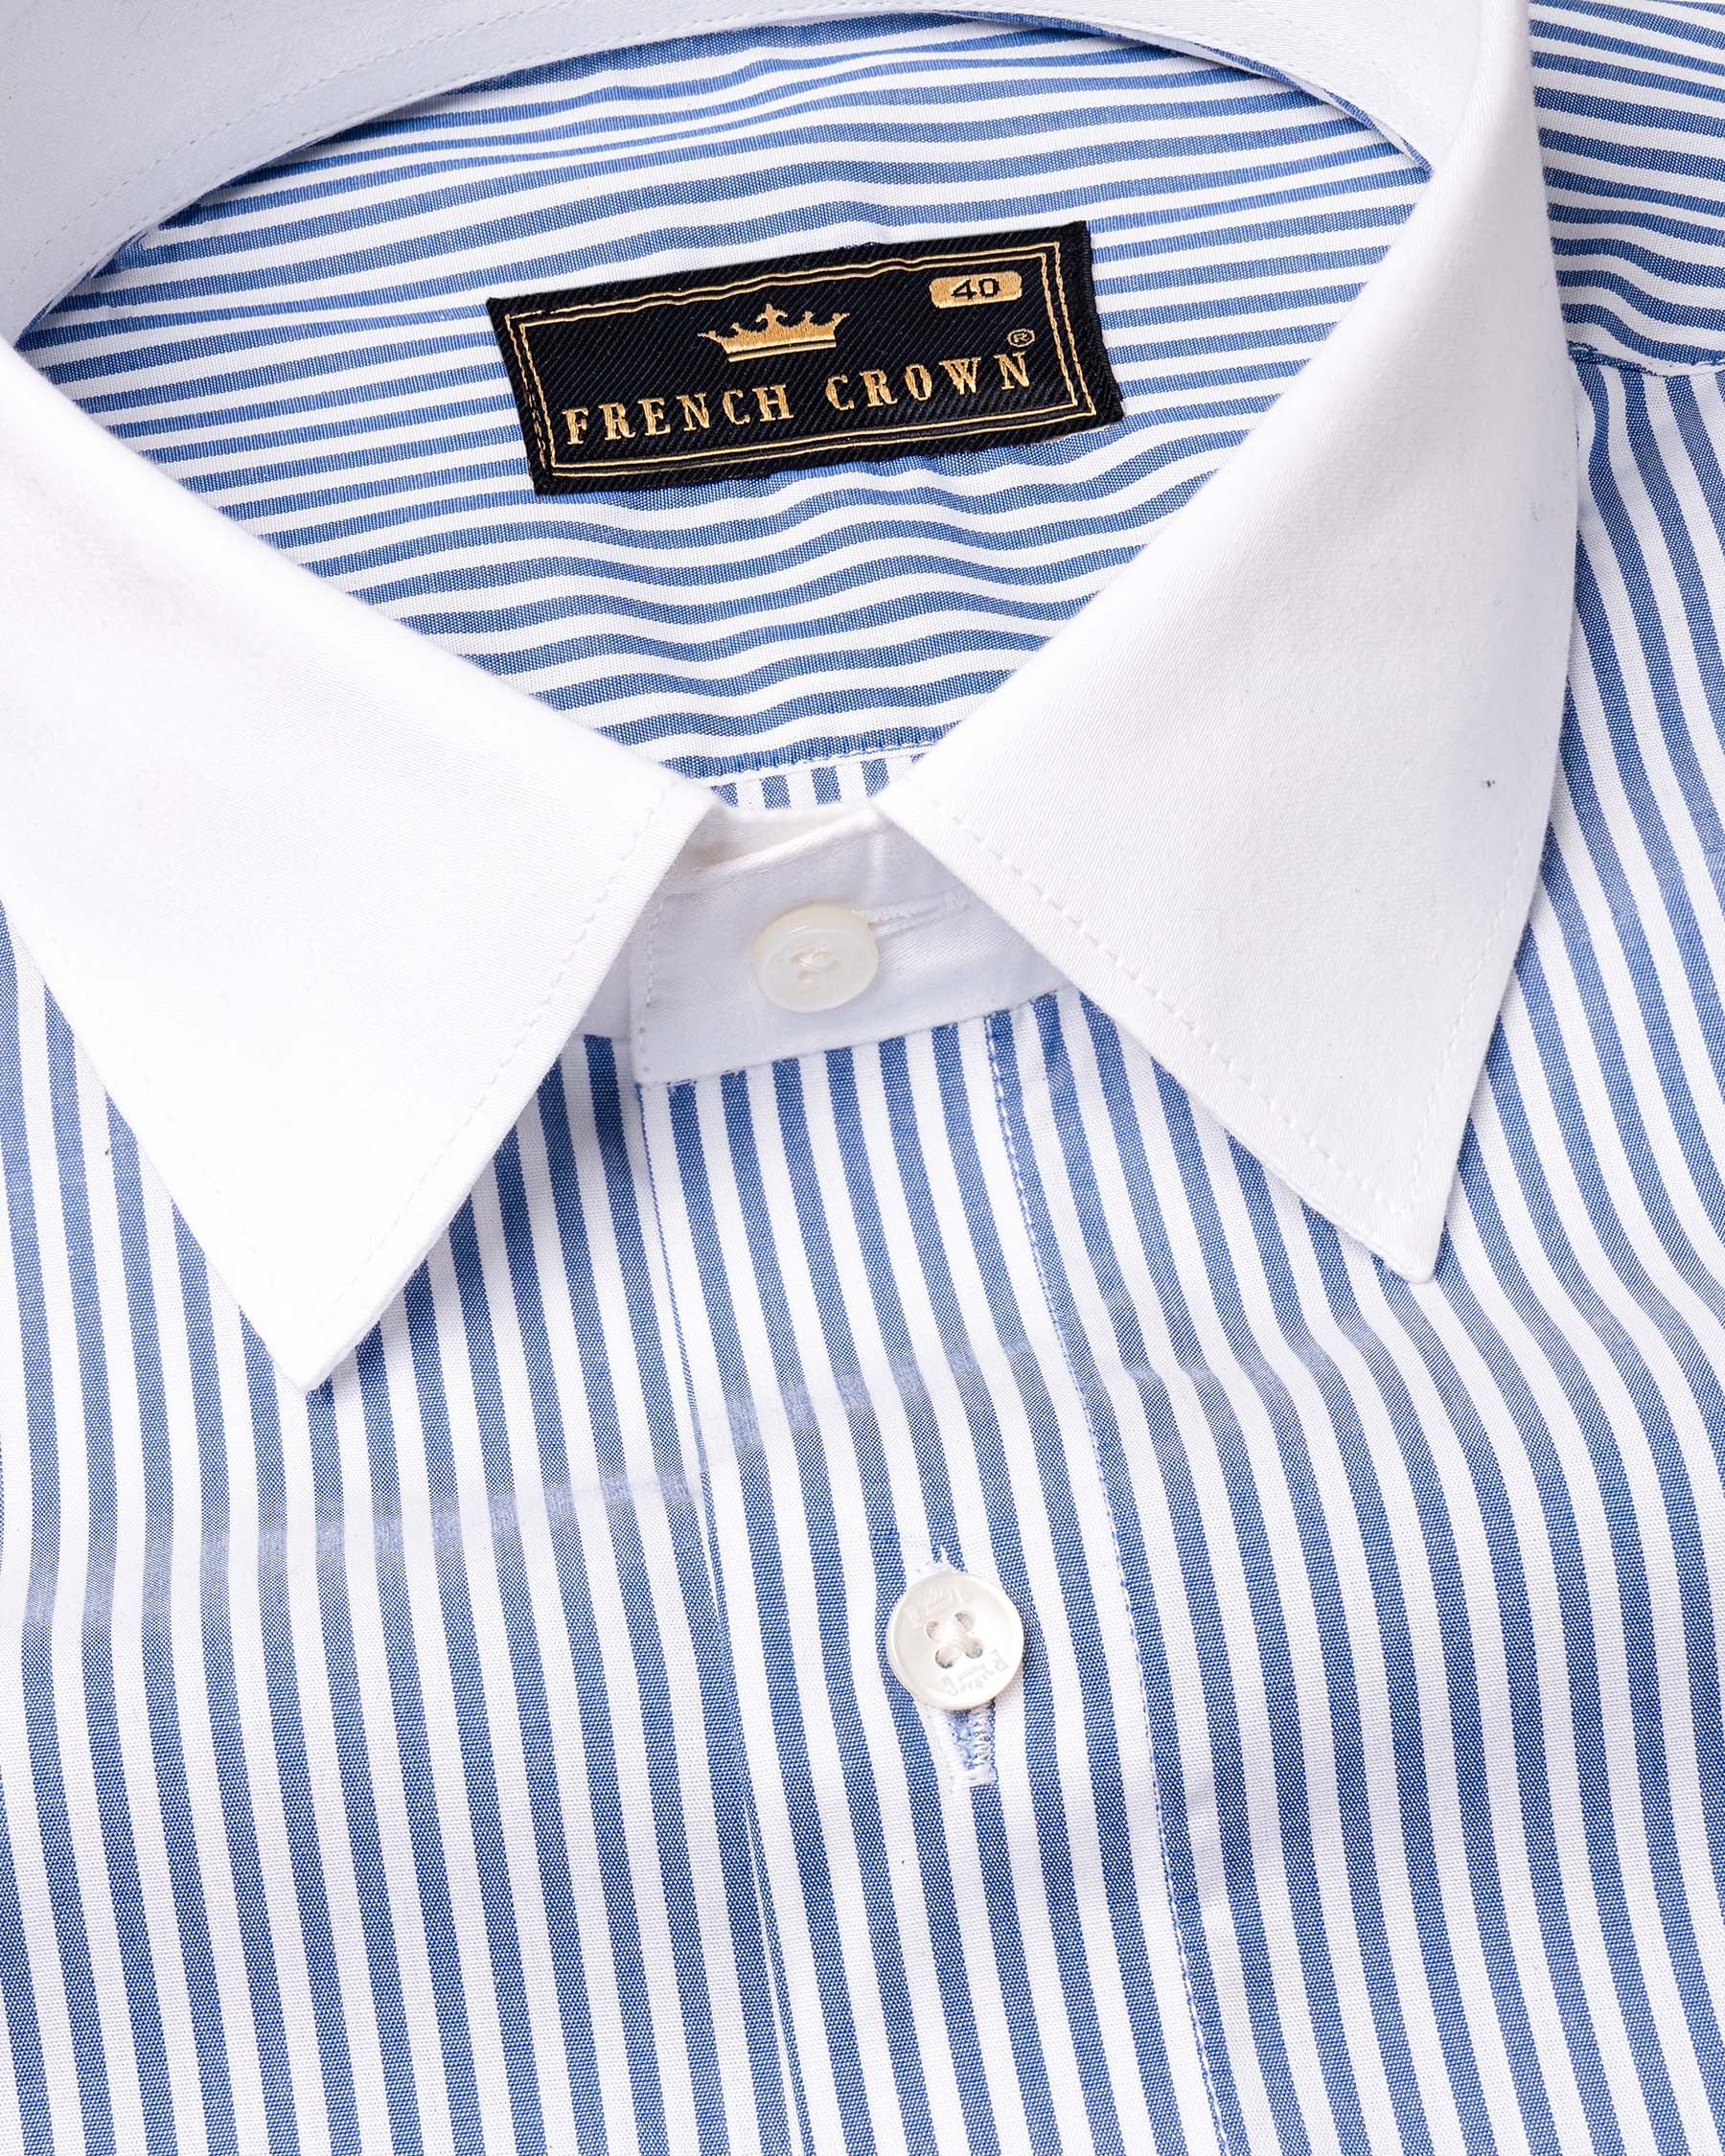 Bright White and Glaucous Blue Striped with White Collar Premium Cotton Shirt 7034-WCC38, 7034-WCCH-38, 7034-WCC39, 7034-WCCH-39, 7034-WCC40, 7034-WCCH-40, 7034-WCC42, 7034-WCCH-42, 7034-WCC44, 7034-WCCH-44, 7034-WCC46, 7034-WCCH-46, 7034-WCC48, 7034-WCCH-48, 7034-WCC50, 7034-WCCH-50, 7034-WCC52, 7034-WCCH-52